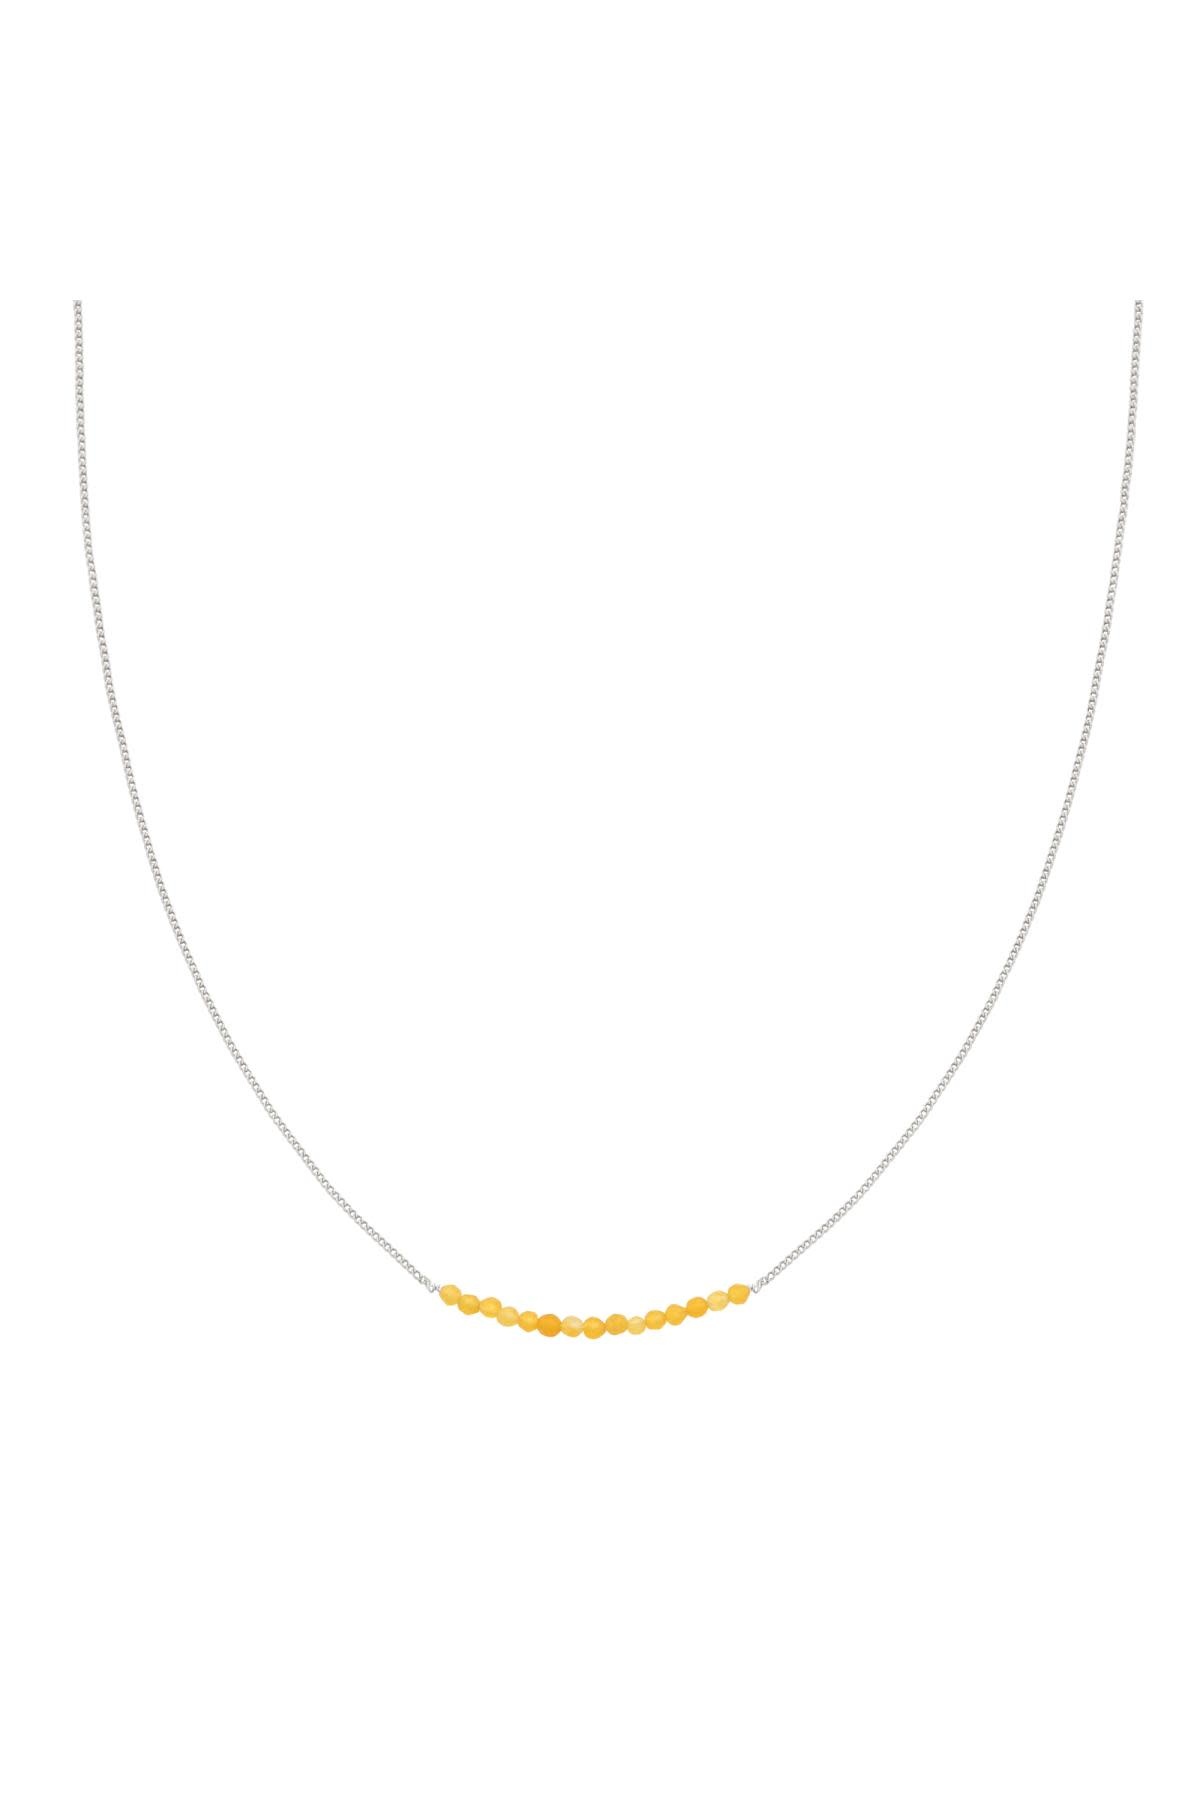 With love Necklace  silver - yellow beads